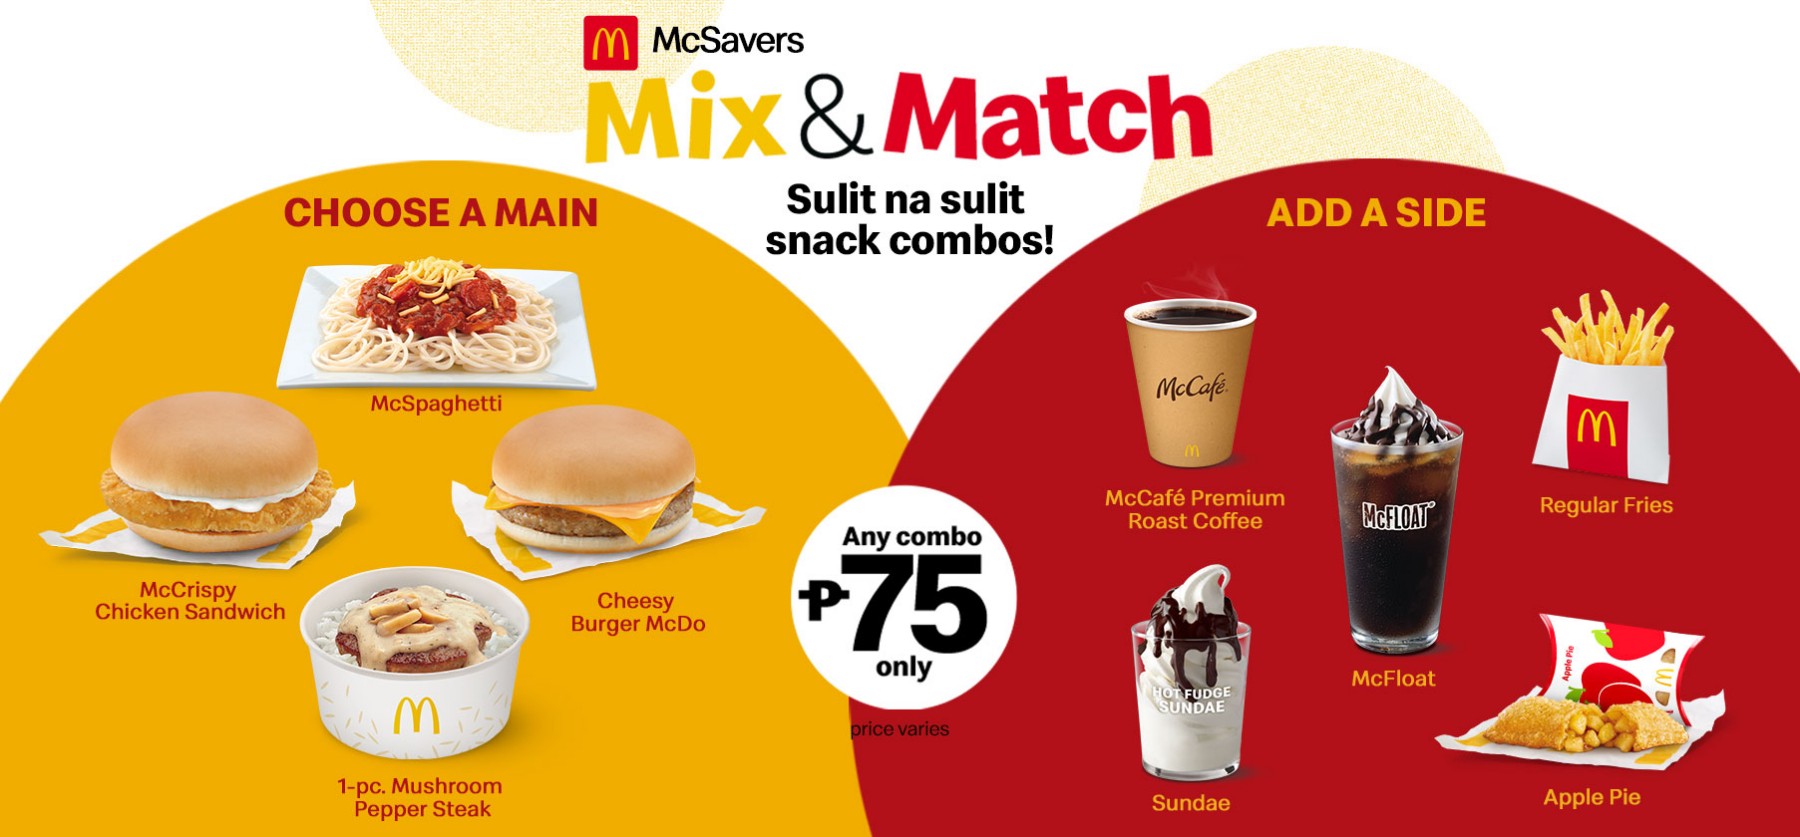 Up studying? Celebrating with McSavers Mix & Match is your next go-to quick fix for all - SCOUT